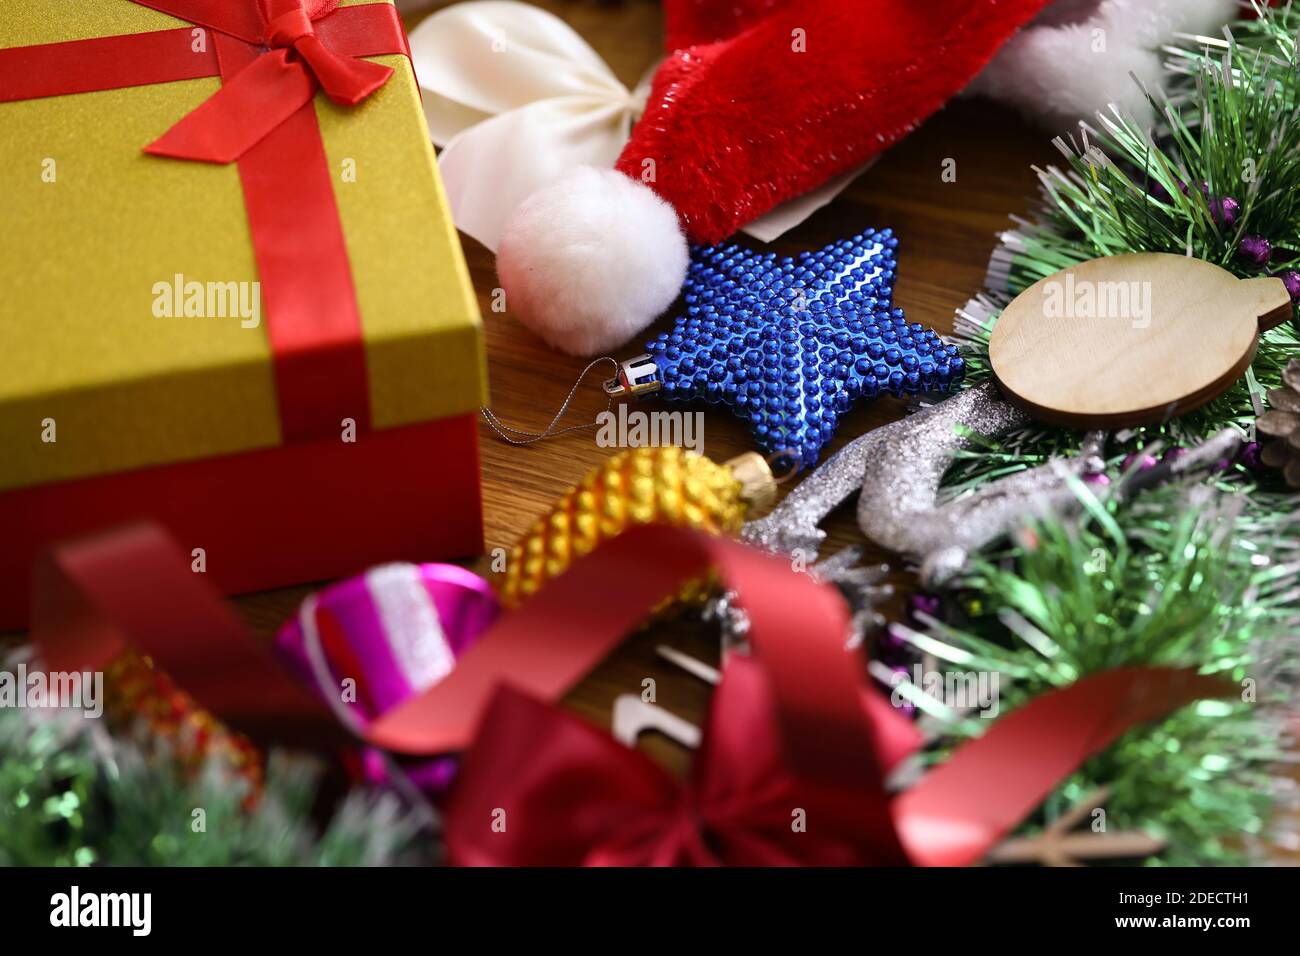 There are New Year's decorations and gift on table. Stock Photo